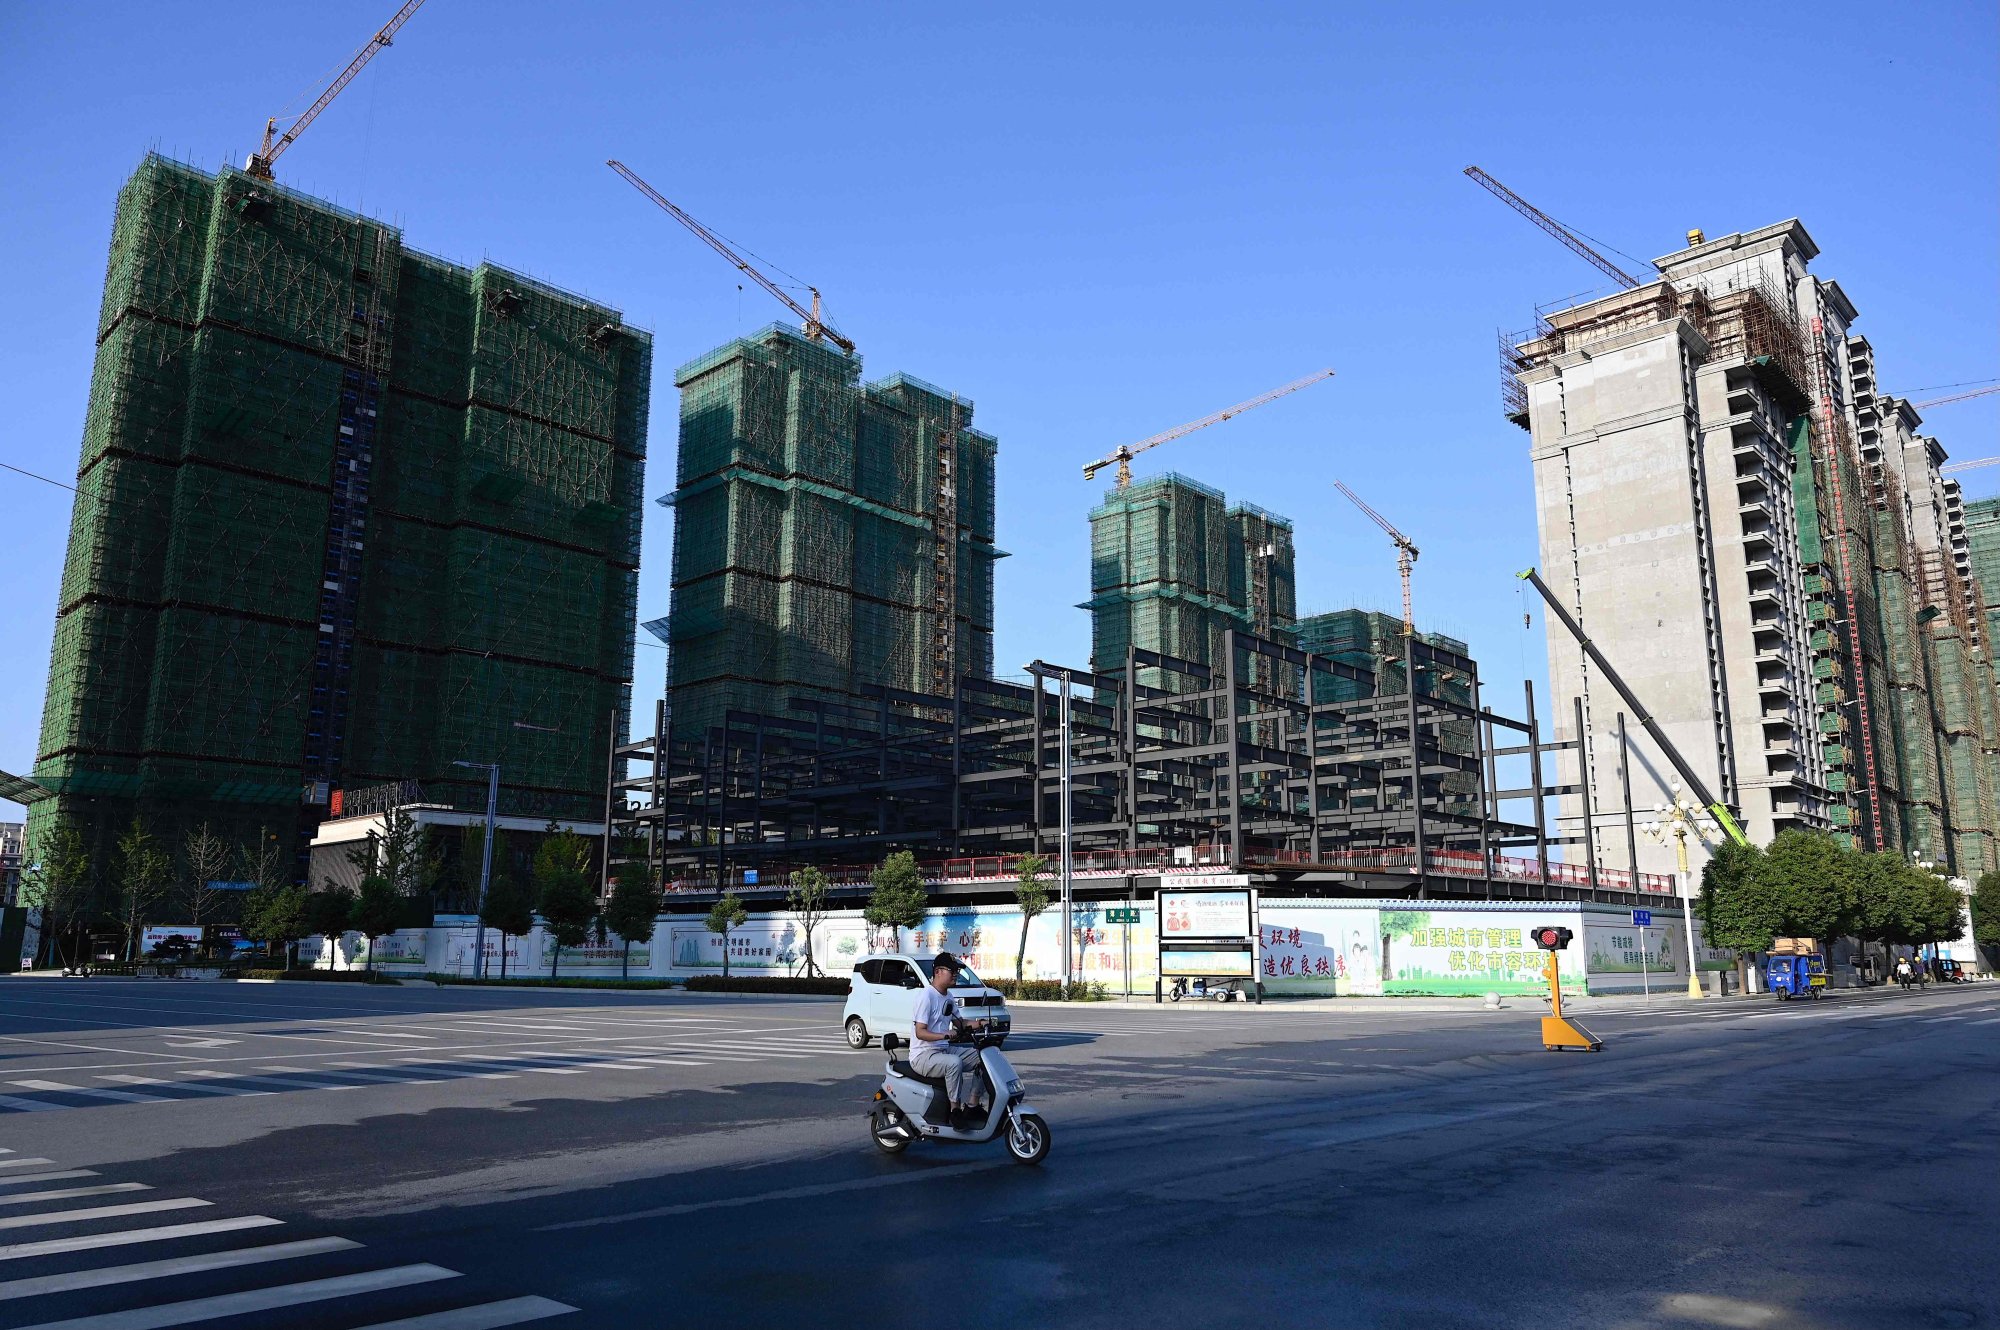 A file photo taken on September 14, 2021 shows the construction site of an Evergrande housing complex in Zhumadian, in central China’s Henan province. Photo: AFP